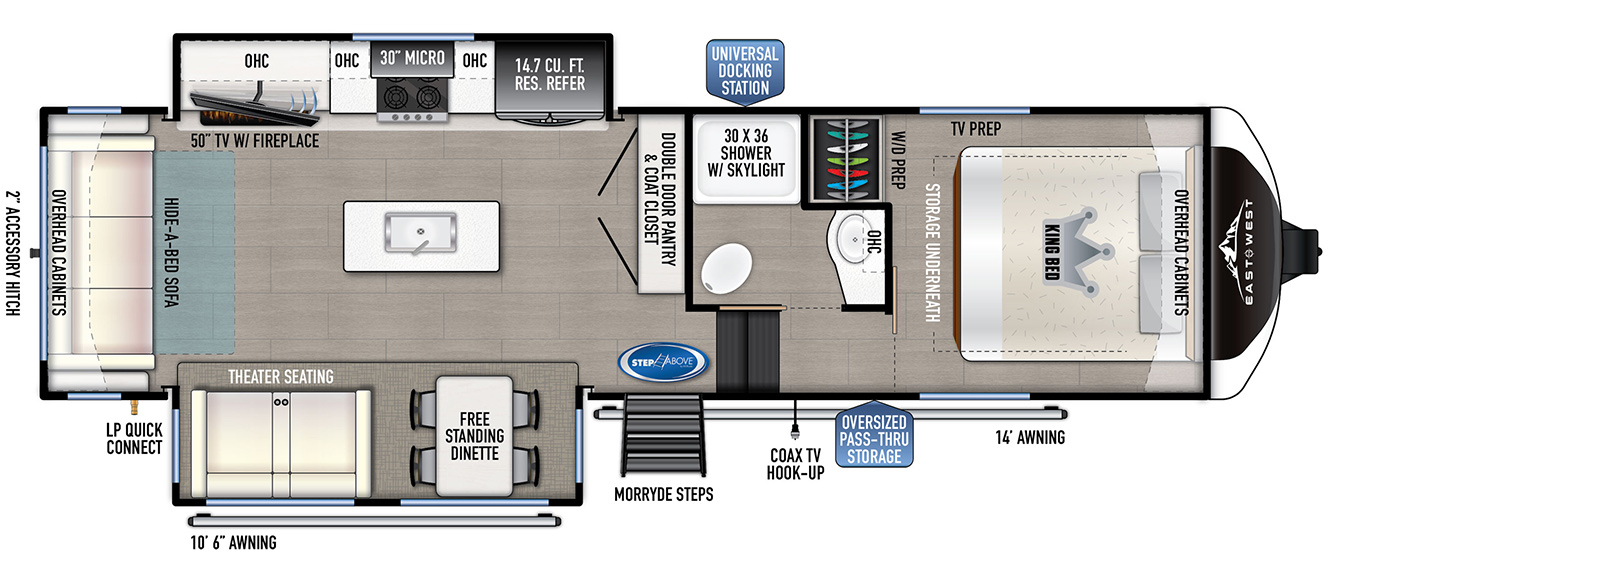 The 285 RL has 2 slide outs, one on the off door side and one on the door side along with one entry door. Interior layout from front to back: front bedroom with king bed featuring overhead cabinets, bedside nightstands, TV hookup and underbed storage; side aisle bathroom with solid pocket door, shower, medicine cabinet above the sink and a porcelain toilet; kitchen living dining area features a double door pantry and coat closet; kitchen island with deep seated sink; off door side slide-out containing refrigerator, oven, microwave and entertainment center; door side slide-out containing dinette and theater seating; and a 78" wide rear sofa with 72" wide rear window and overhead cabinets above.